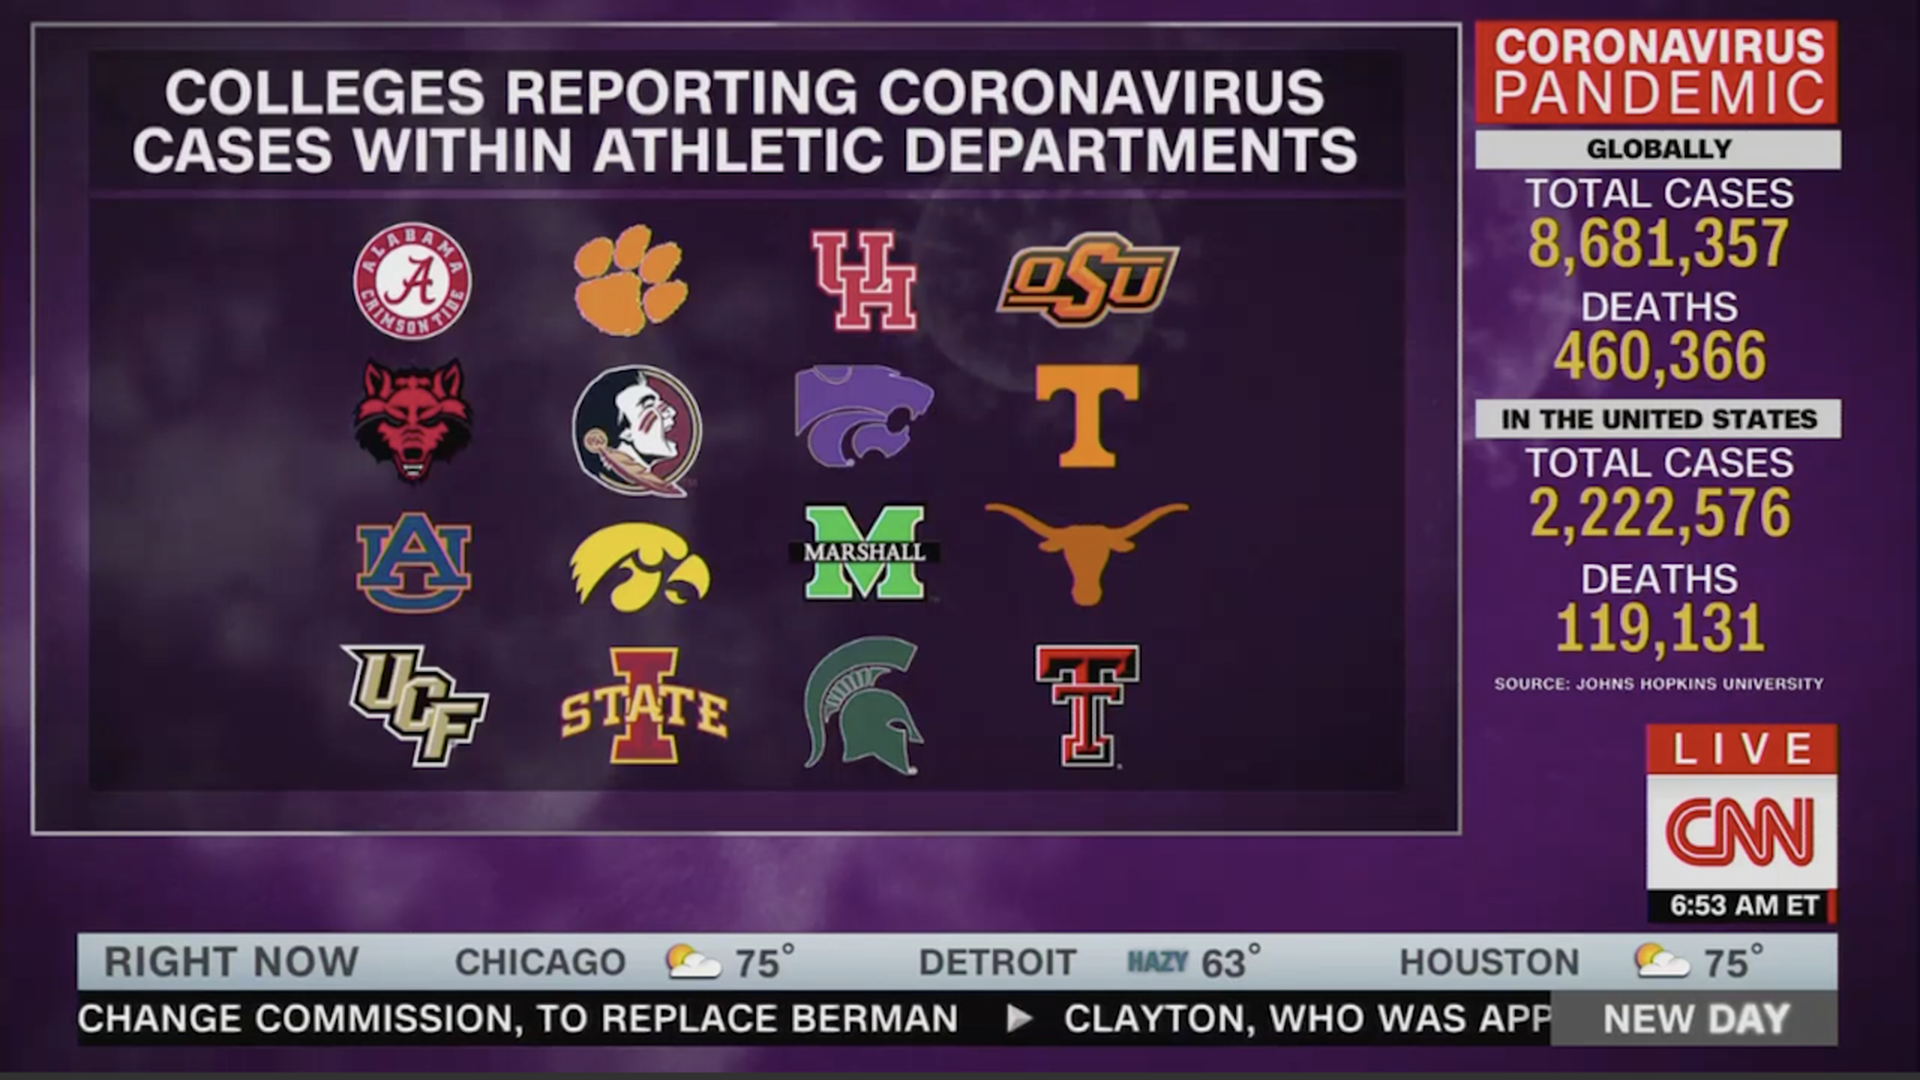 Screenshot from CNN that depicts which universities have confirmed coronavirus cases in their athletic departments